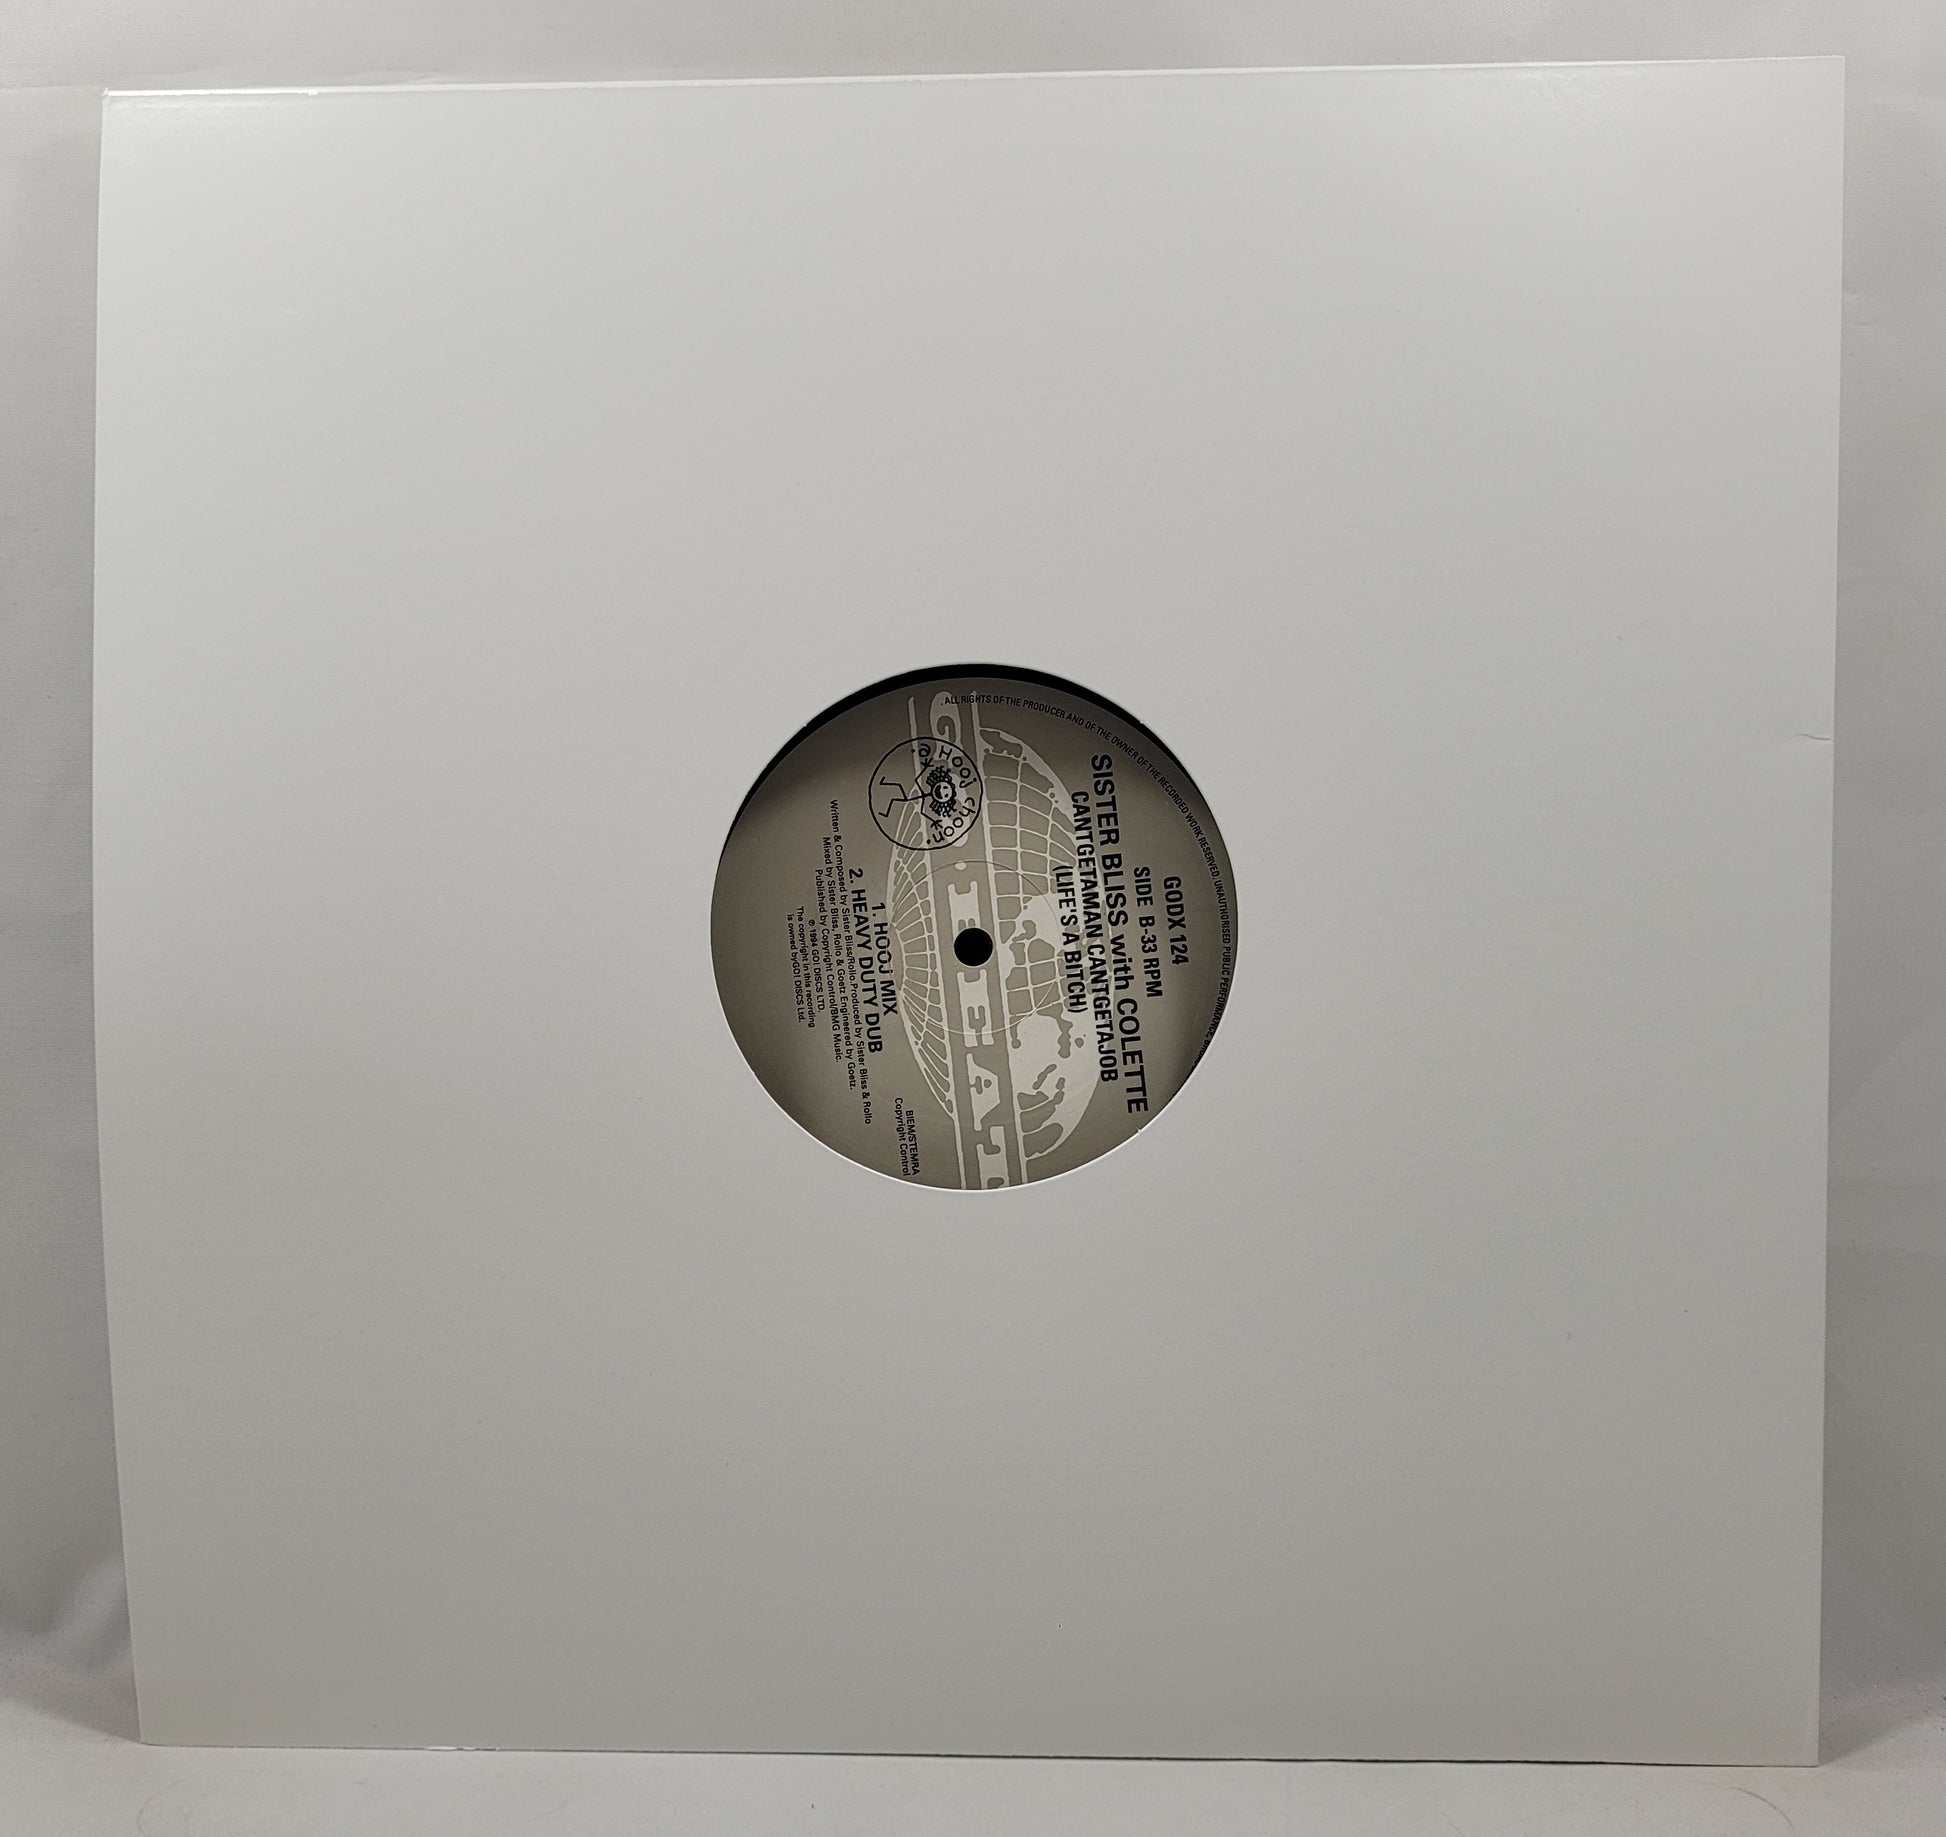 Sister Bliss with Colette - Cantgetaman, Cantgetajob (Life's a Bitch) [1994 Used Vinyl Record 12" Single]